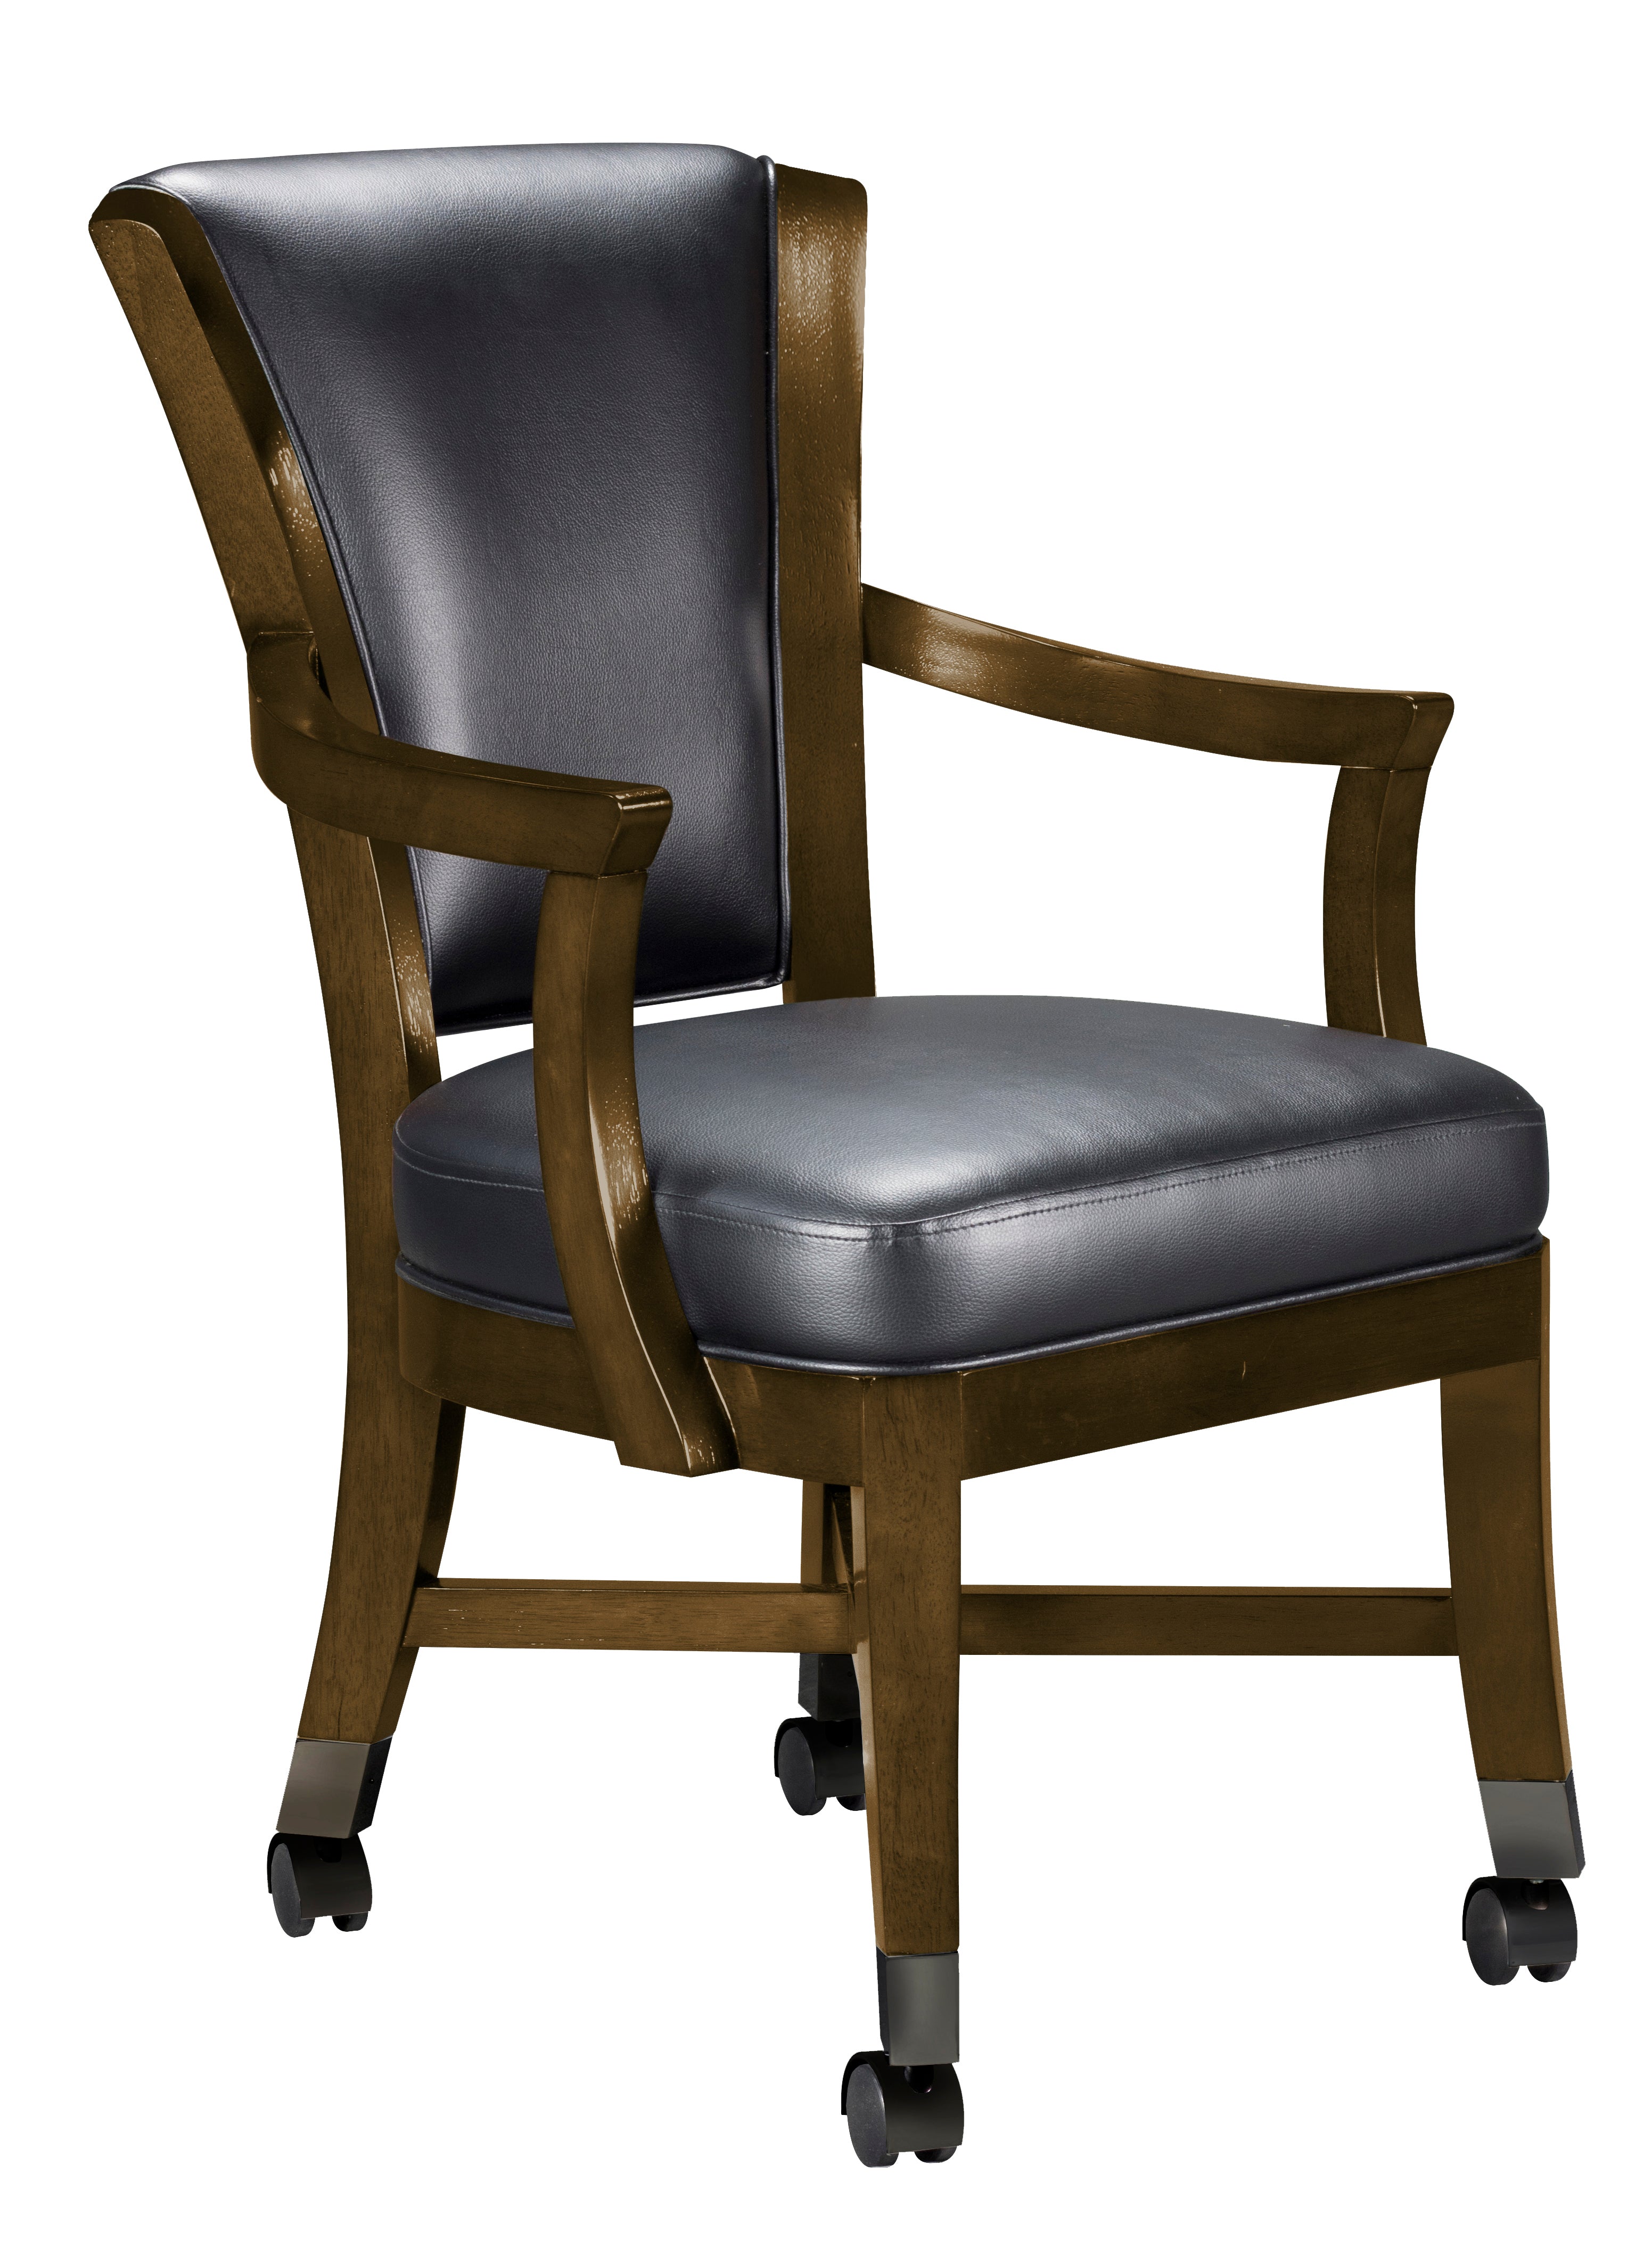 Legacy Billiards Elite Caster Game Chair in Nutmeg Primary Image